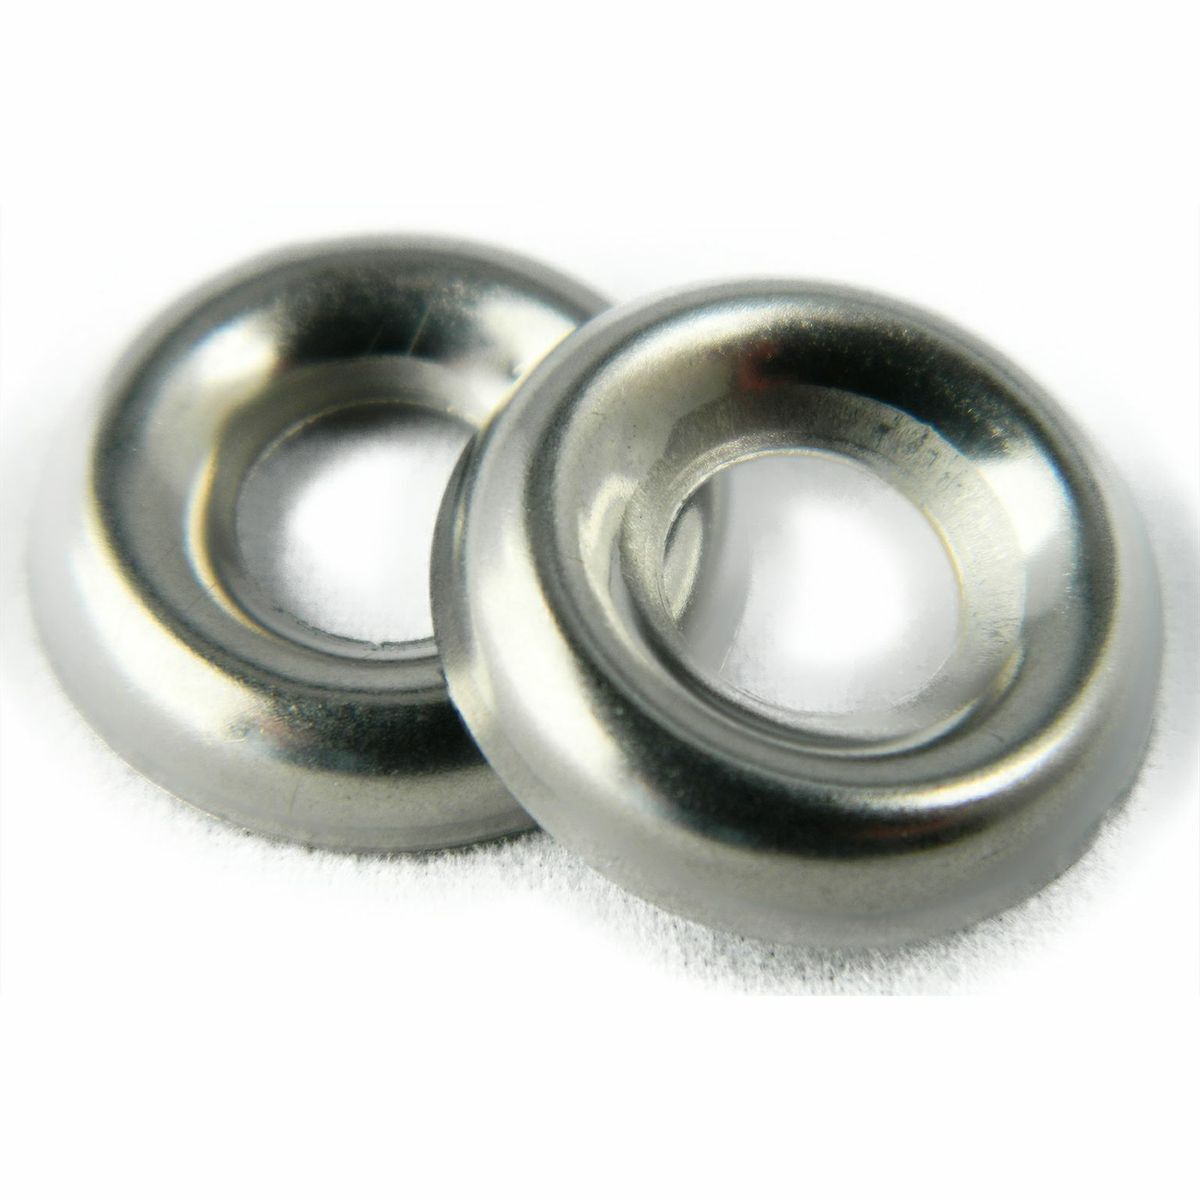 Stainless Steel Cup Washer Finishing Countersunk #6 Qty 100